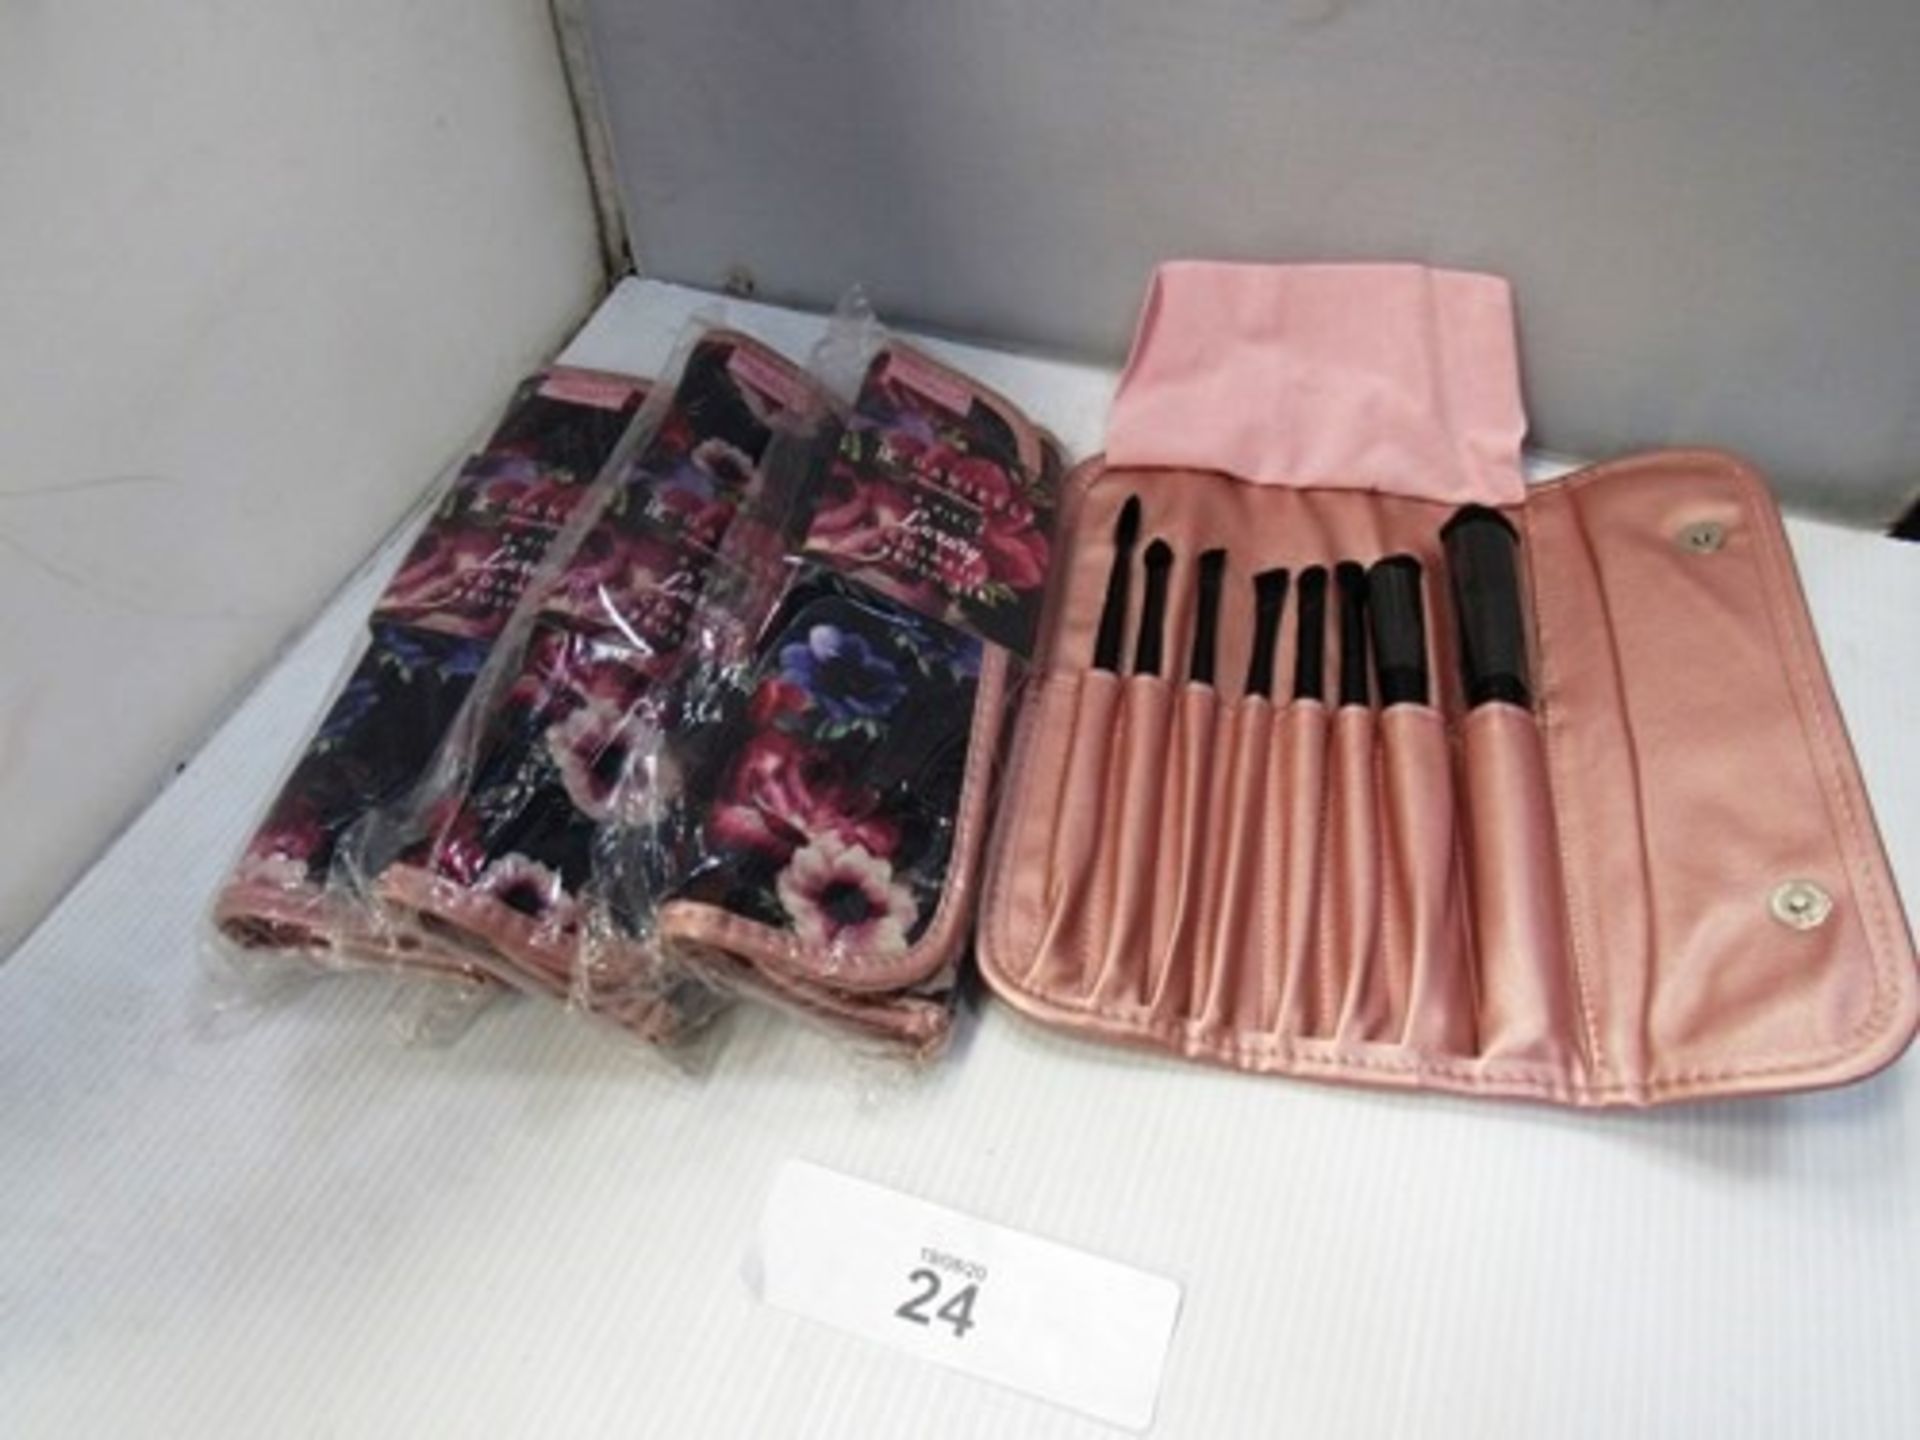 18 x purses and makeup bags including Danielle Collection and River Island in an assortment of - Image 3 of 3